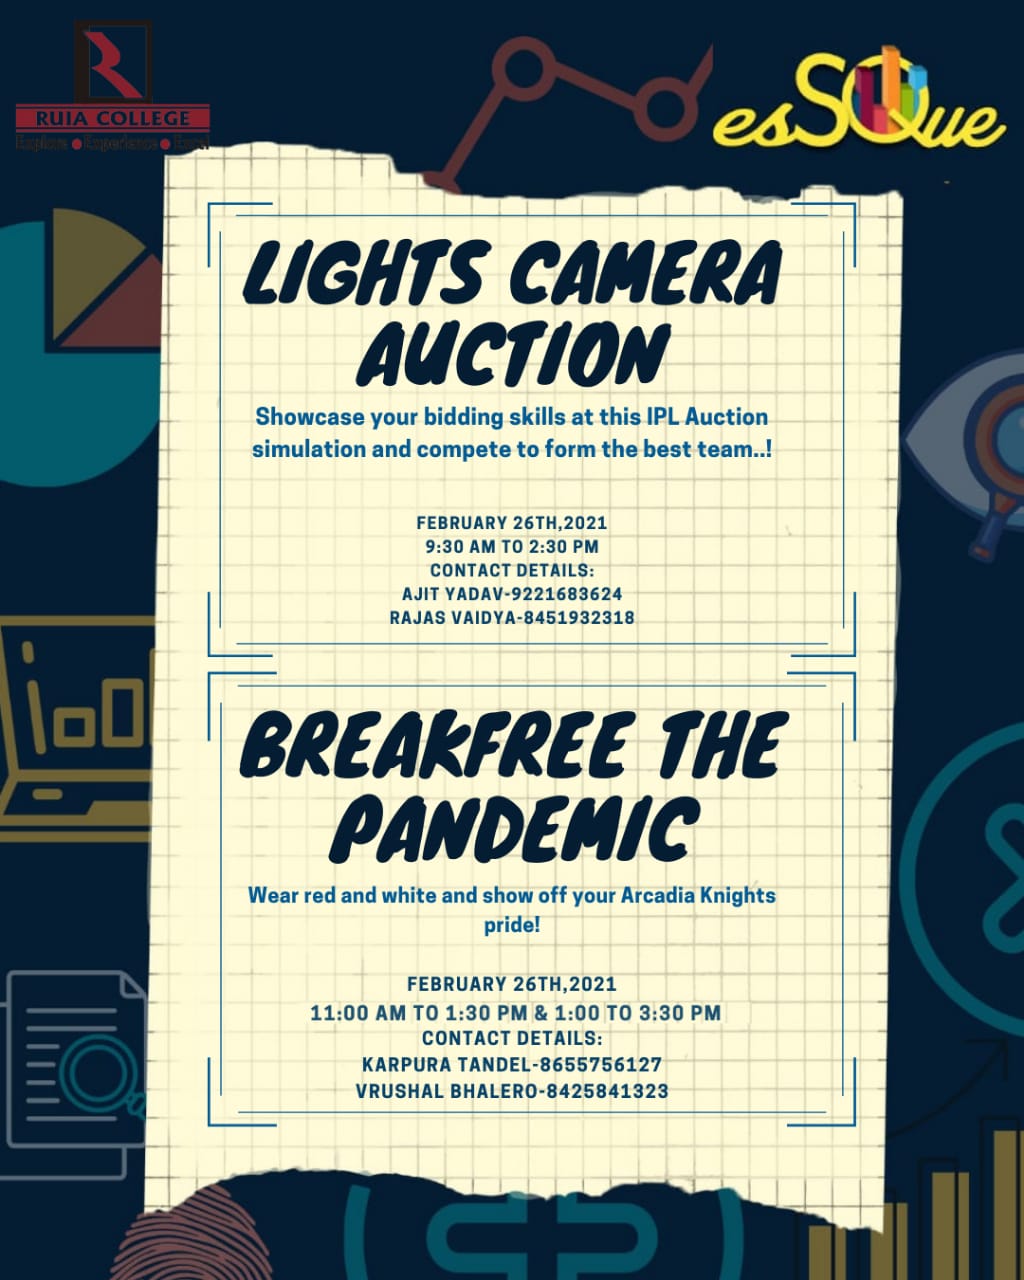 LIGHTS CAMERA AUCTION & BREAKFREE THE PANDEMIC